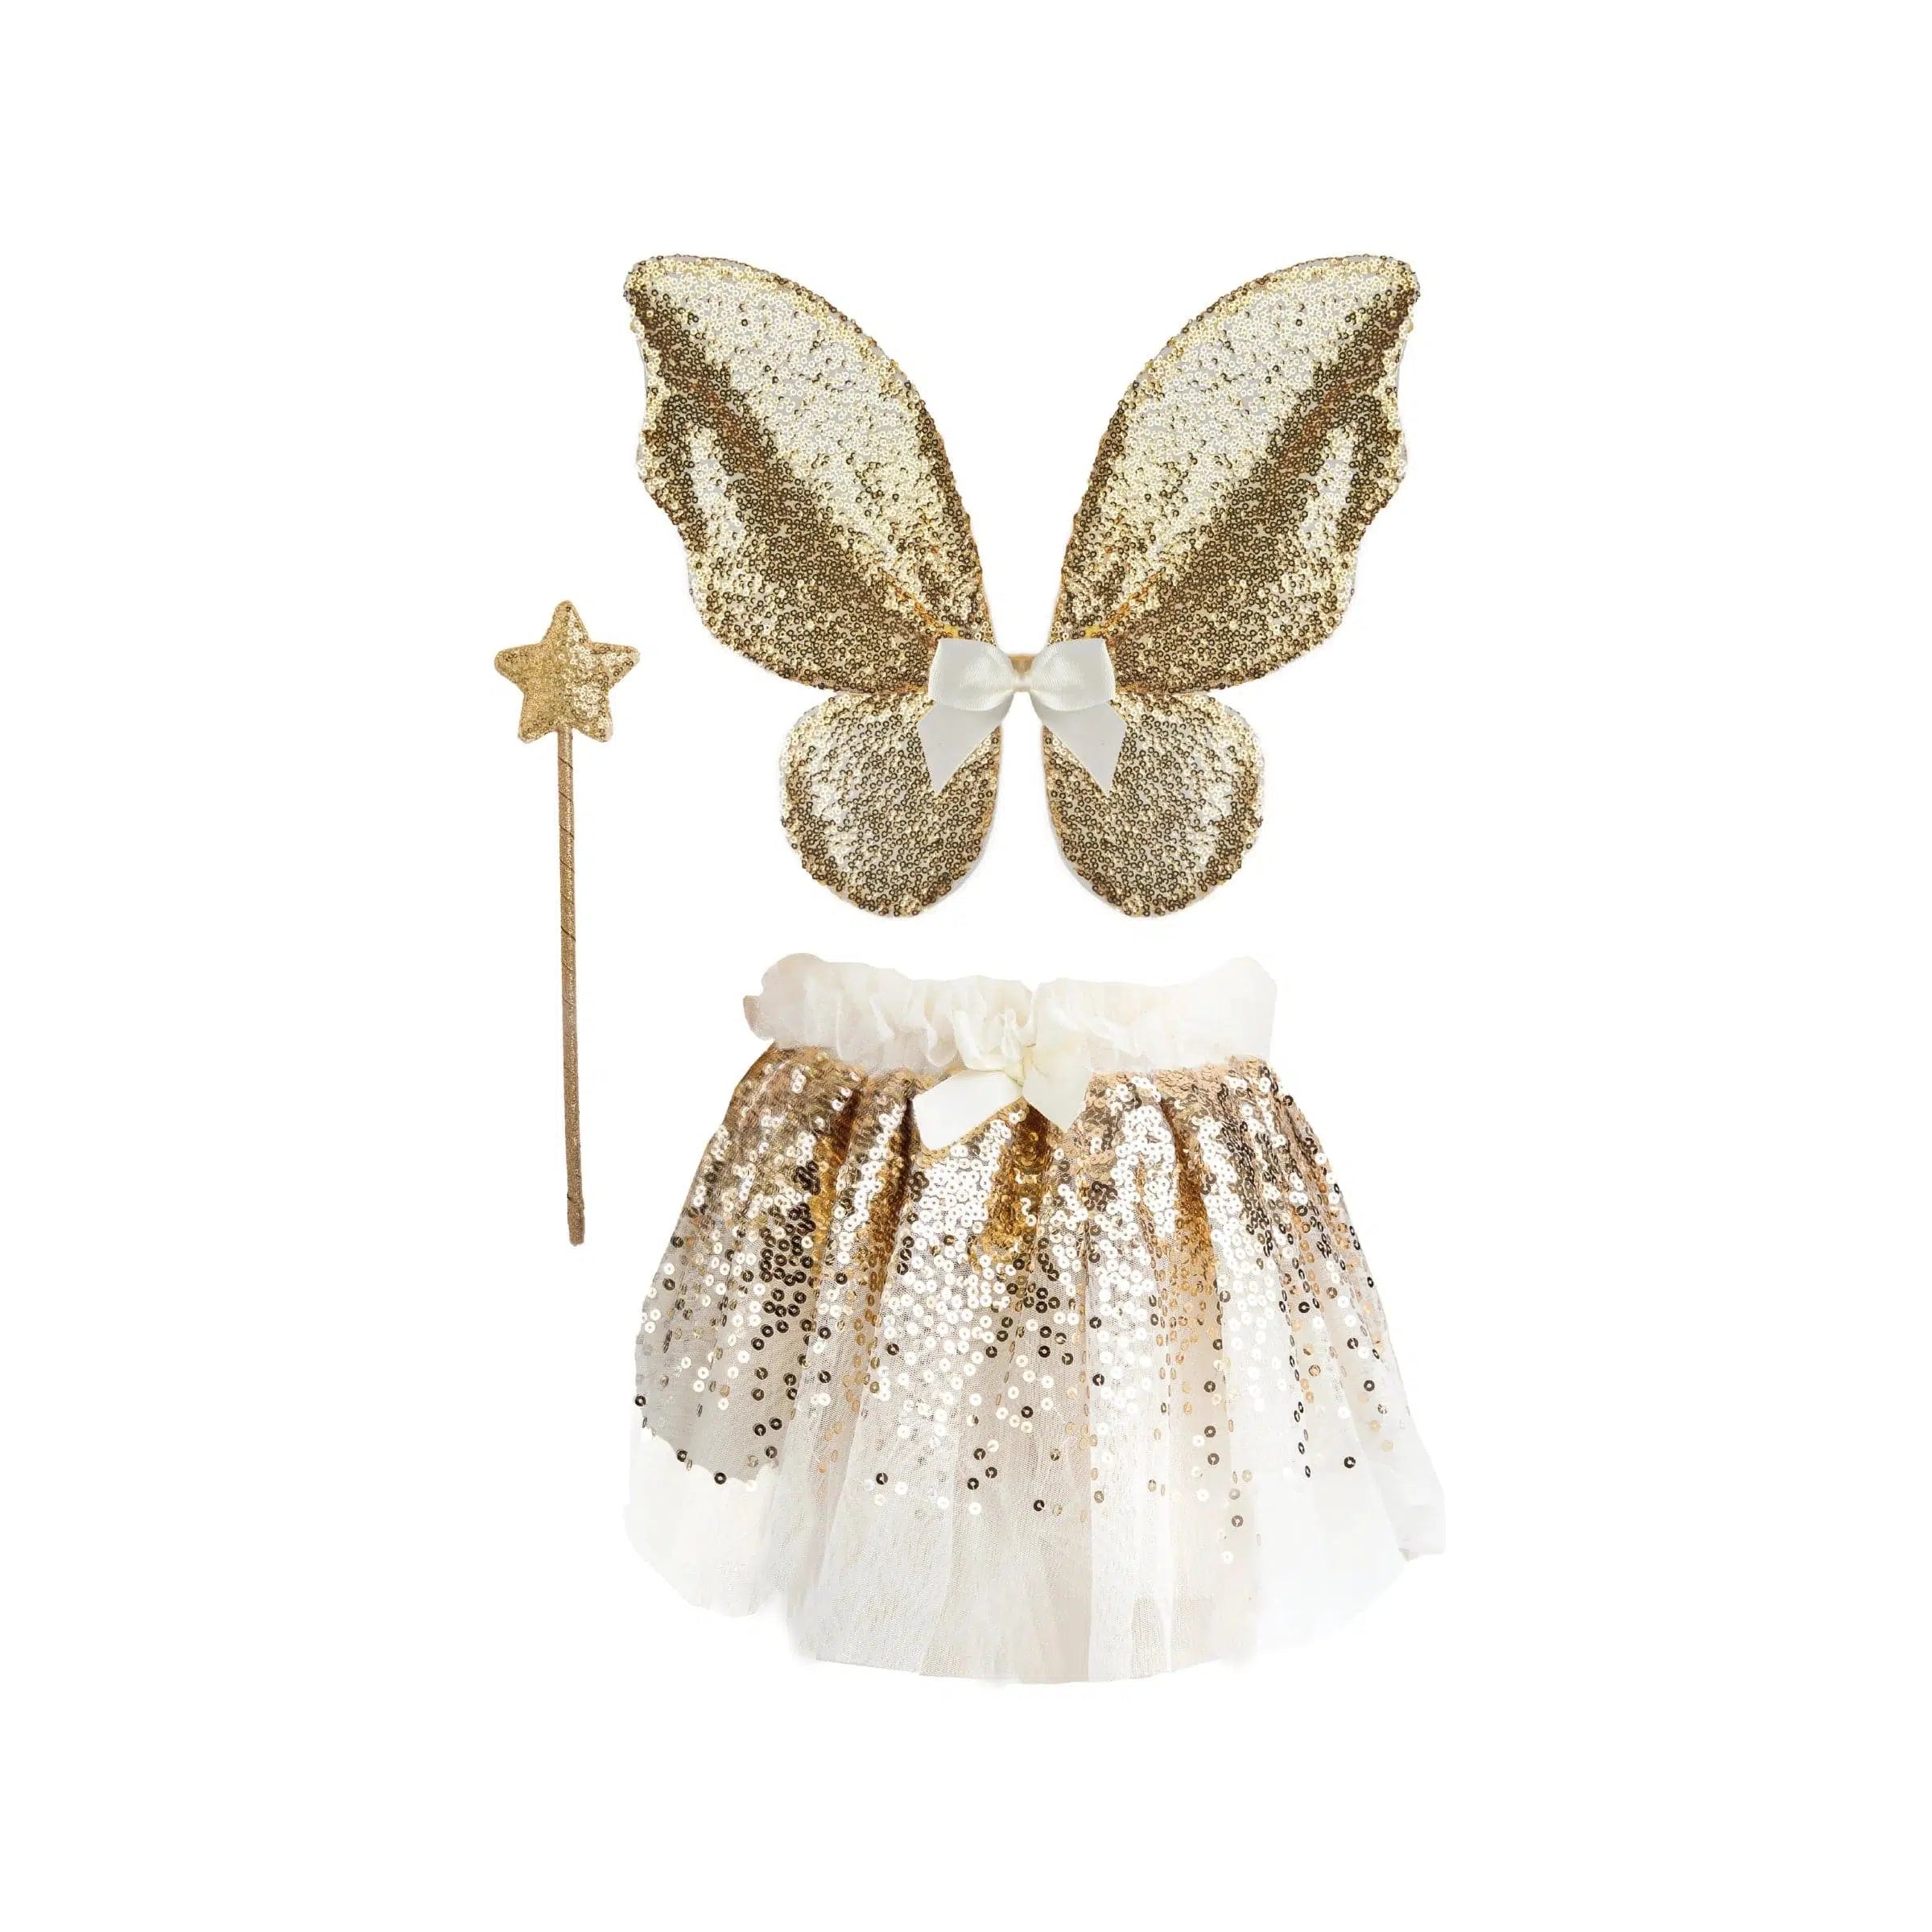 Creative Education-Gracious Gold Sequins Set - Skirt, Wings, Wand-41755-size adjustable 4-6-Legacy Toys